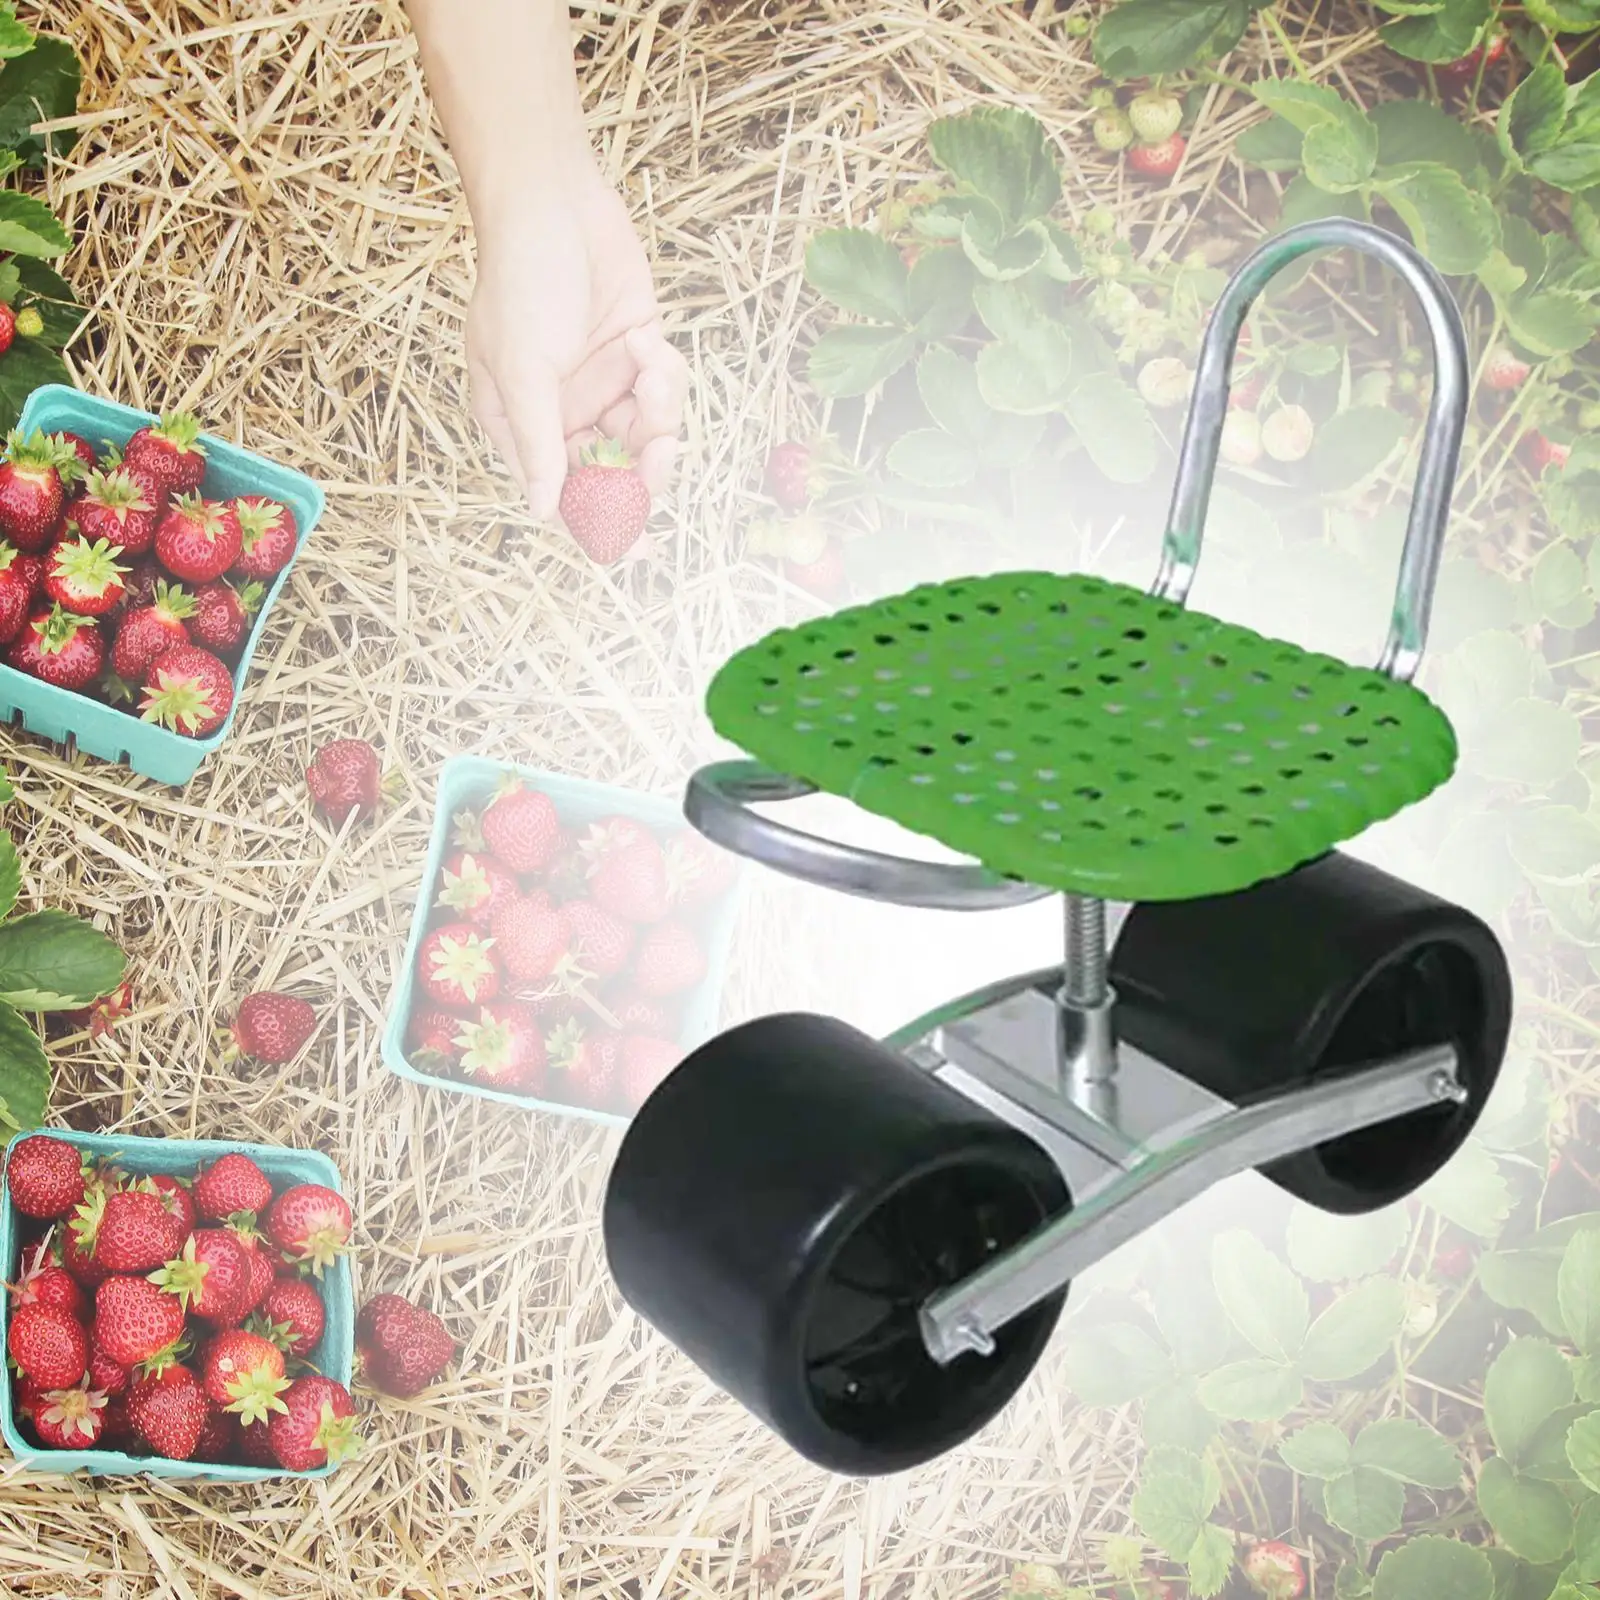 Garden Trolley Rolling Seat Adjustable Steerable Outdoor Utility Cart Mobile Garden Workseat for Outdoors Lawns Easy to Move